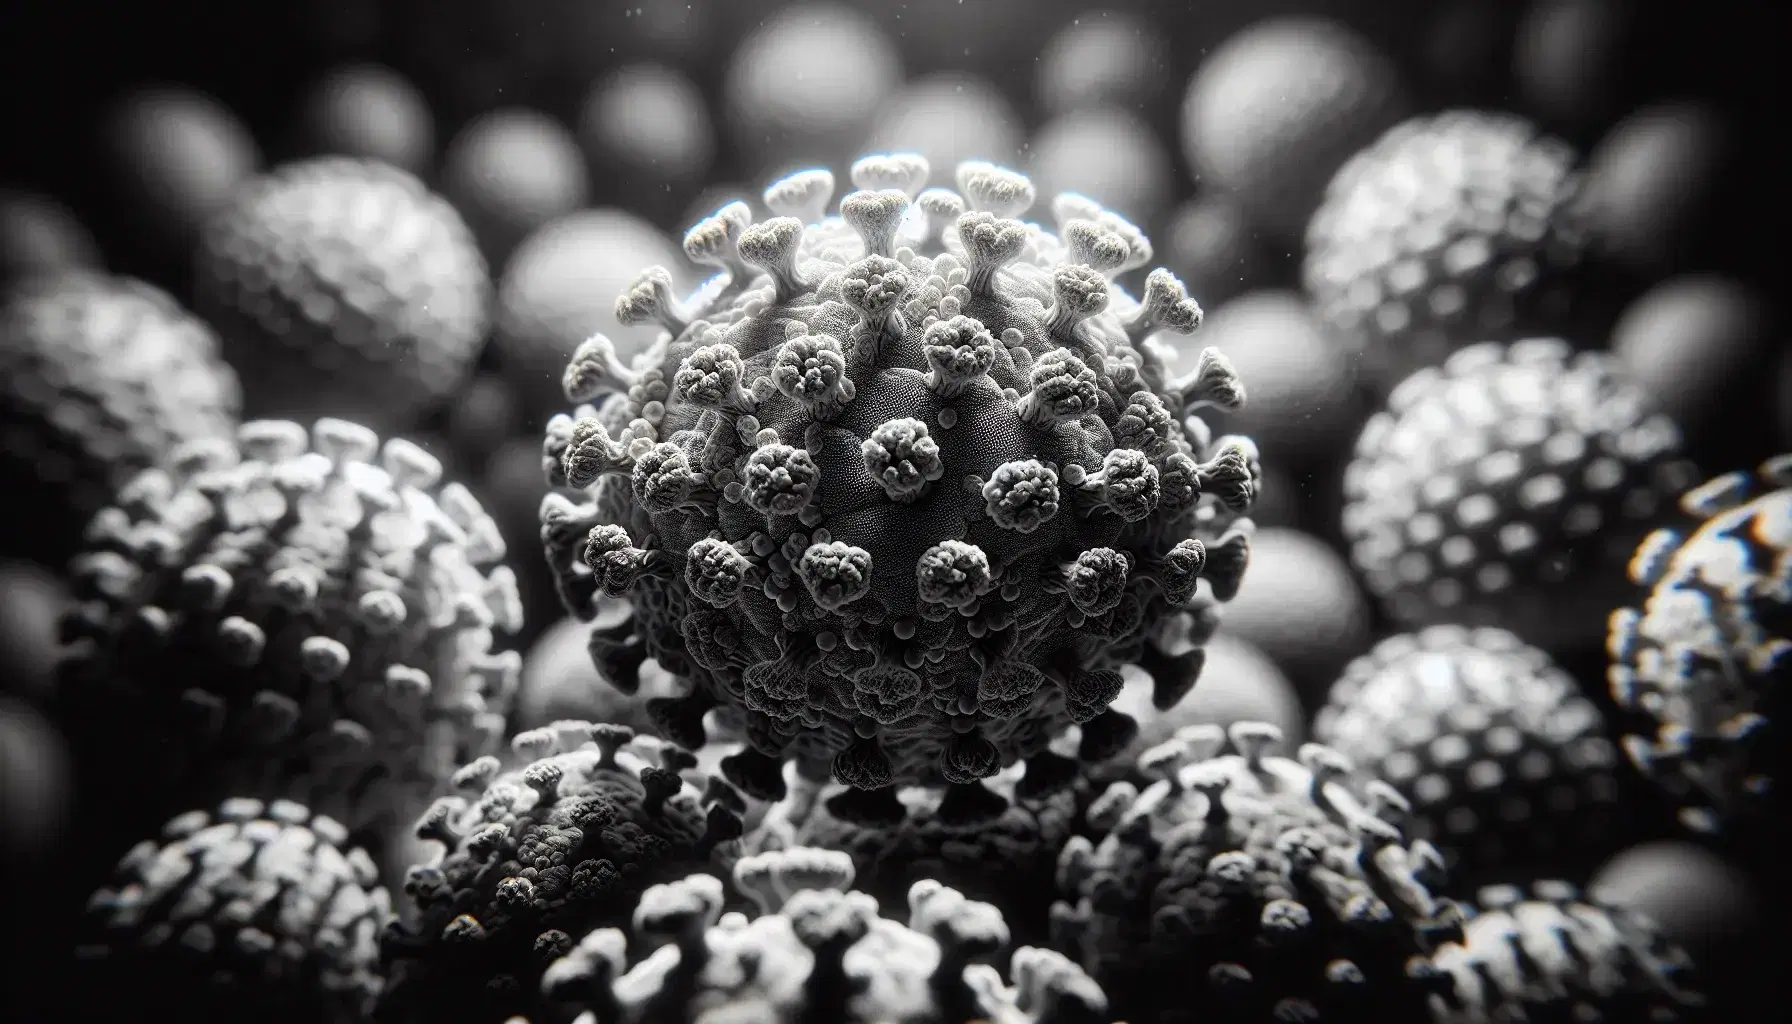 High-magnification electron microscope view of spherical virus particles with crown-like spikes, showcasing detailed surface textures in grayscale.